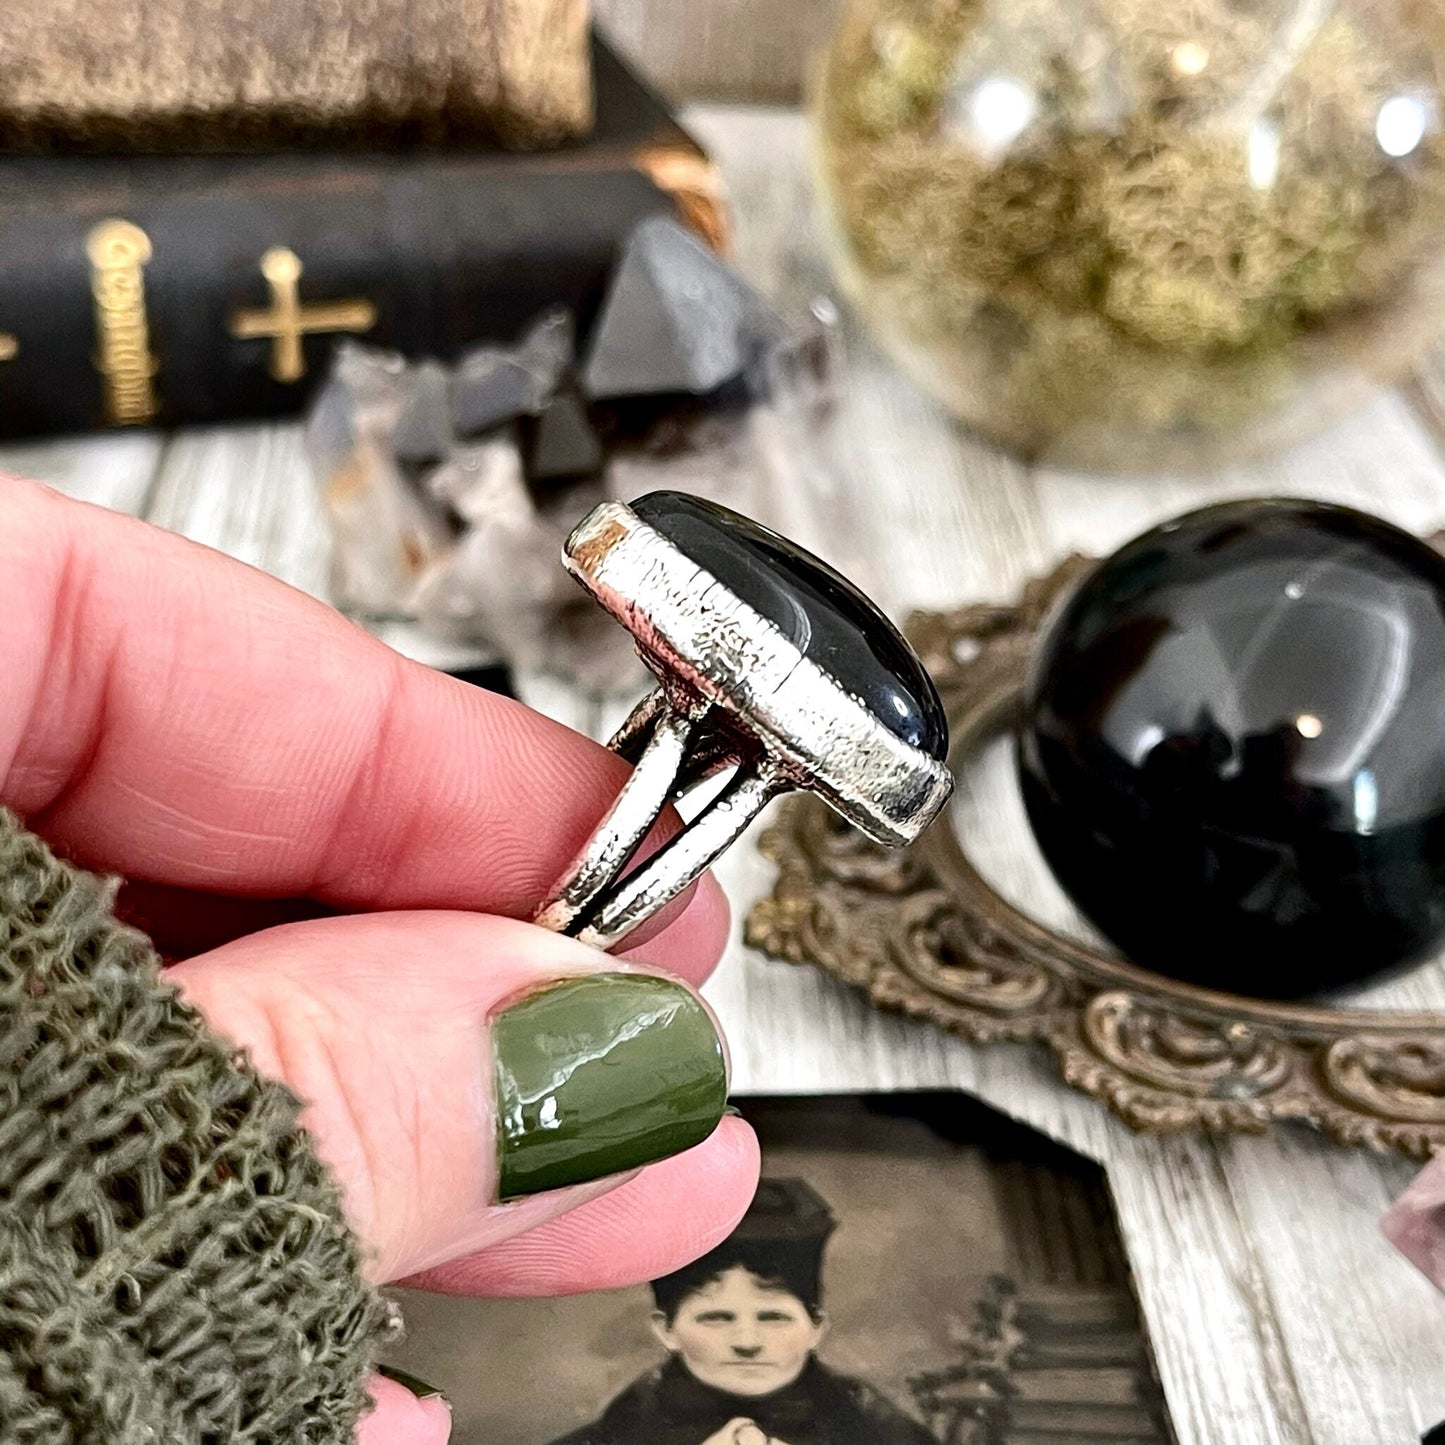 Big Bold Jewelry, Big Crystal Ring, Big Silver Ring, Big Statement Ring, Big Stone Ring, Etsy ID: 1599127836, FOXLARK- RINGS, Golden Sheen, Jewelry, Large Boho Ring, Large Crystal Ring, Natural stone ring, Obsidian Ring, Rings, silver crystal ring, Silver